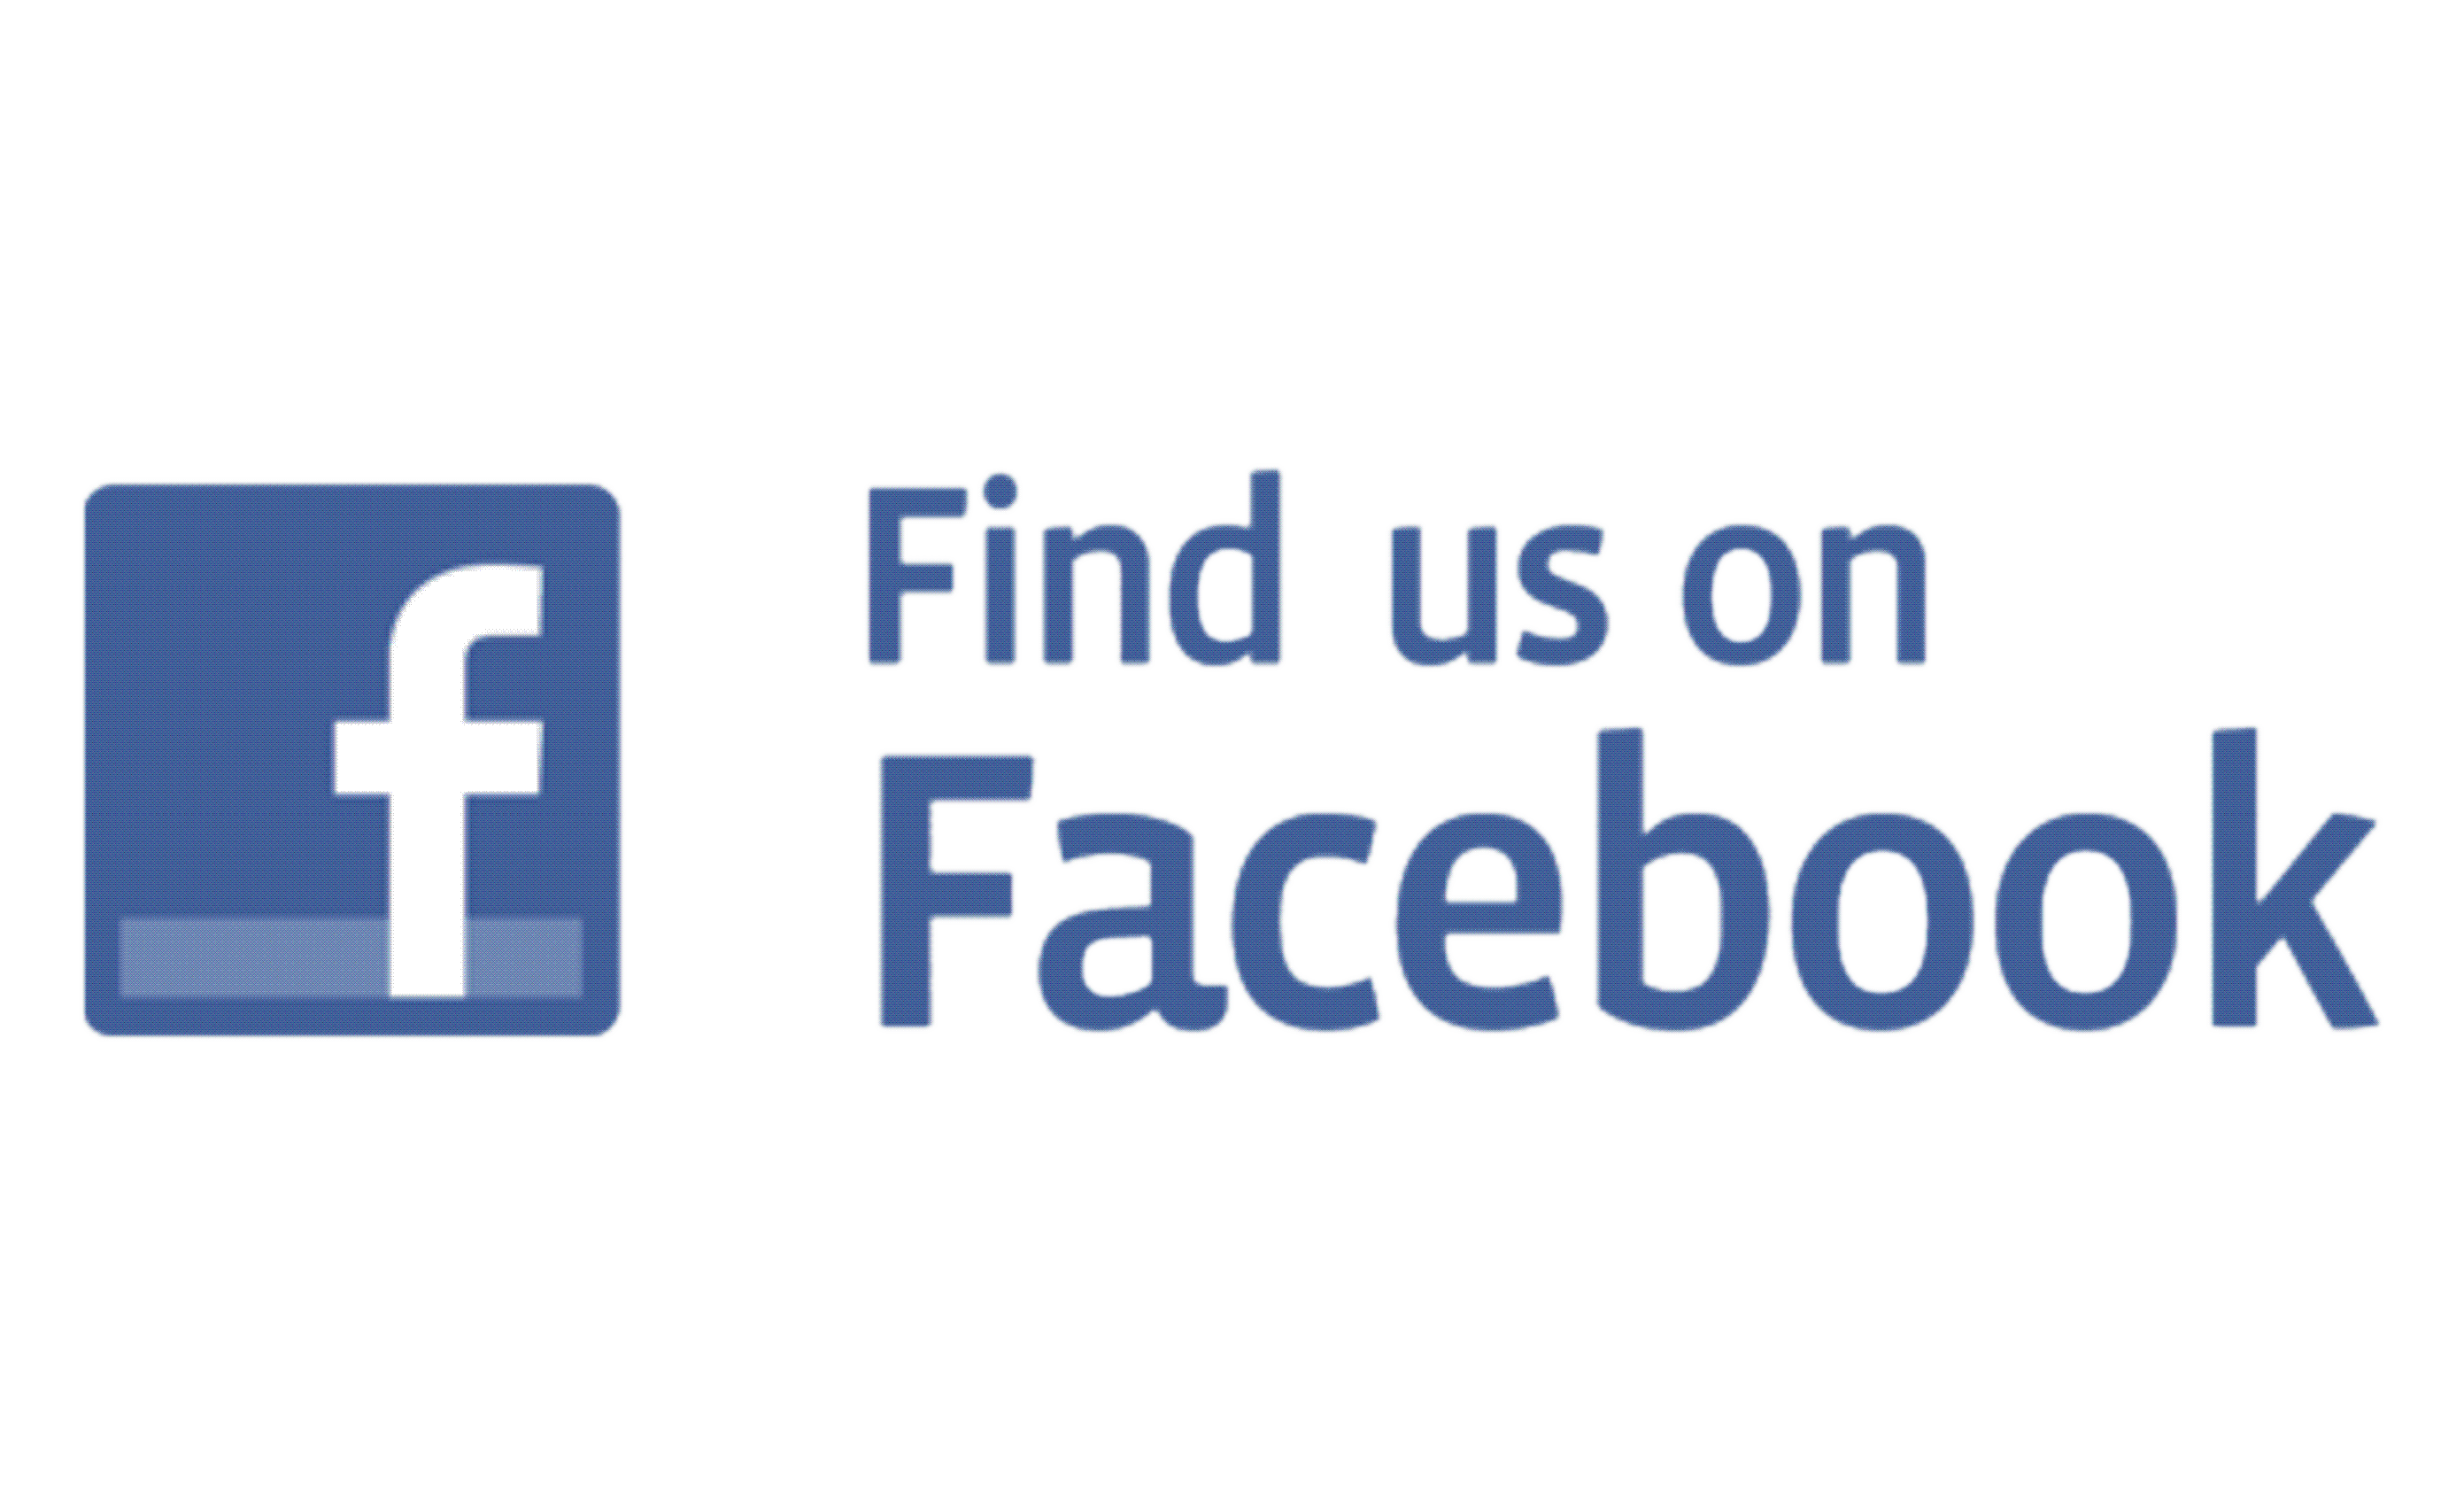 Find Us On Facebook Logo - Find us on Facebook Logo PNG Image #46272 - Free Icons and PNG ...